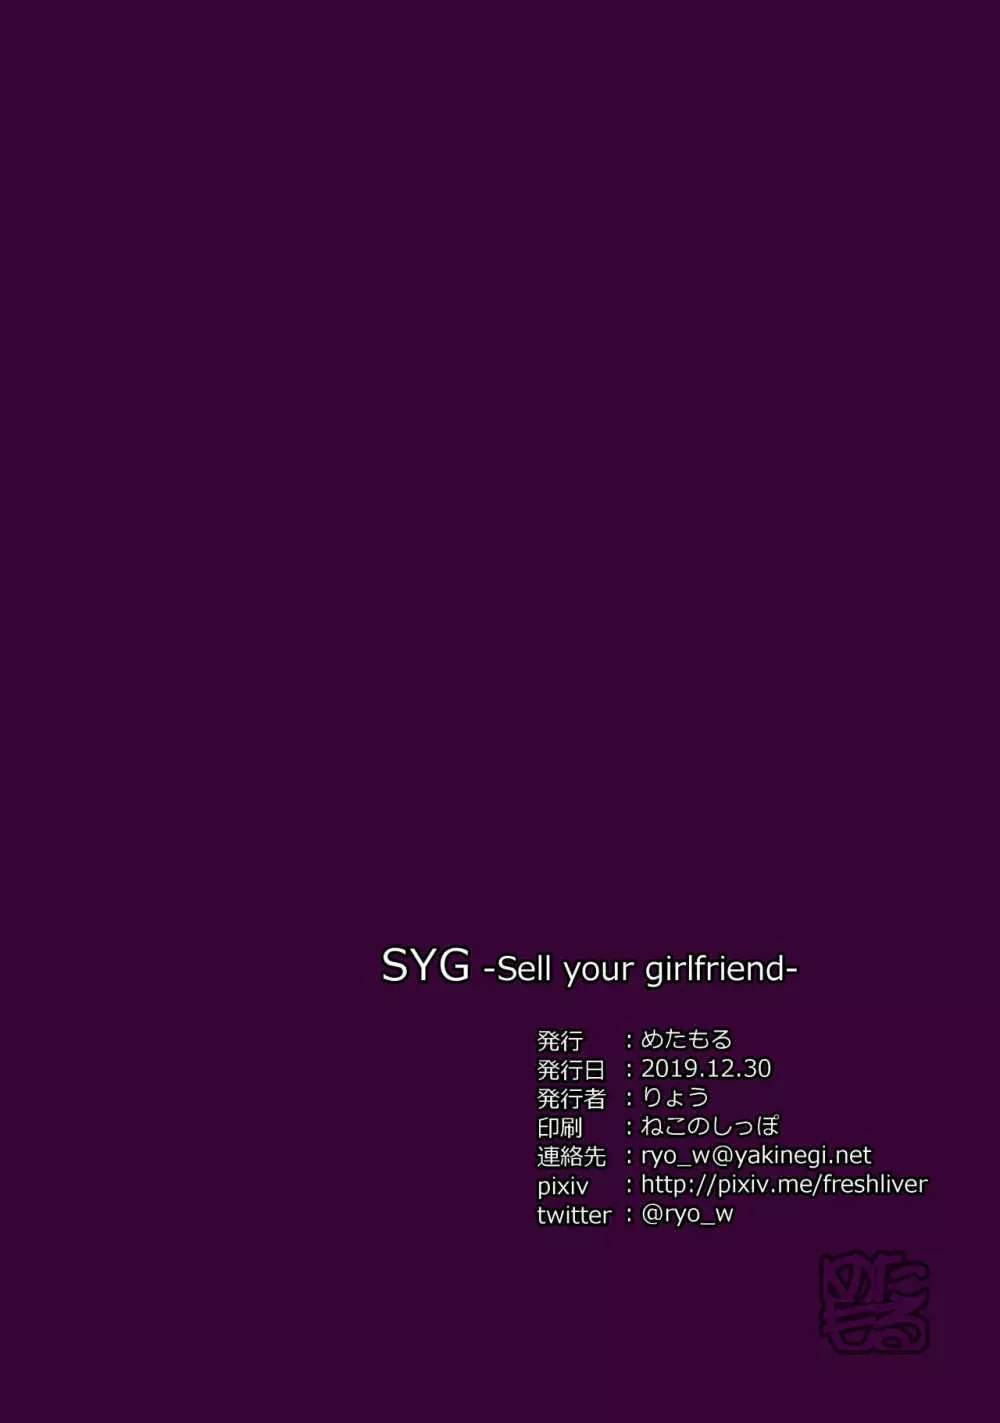 SYG -Sell your girlfriend- 42ページ